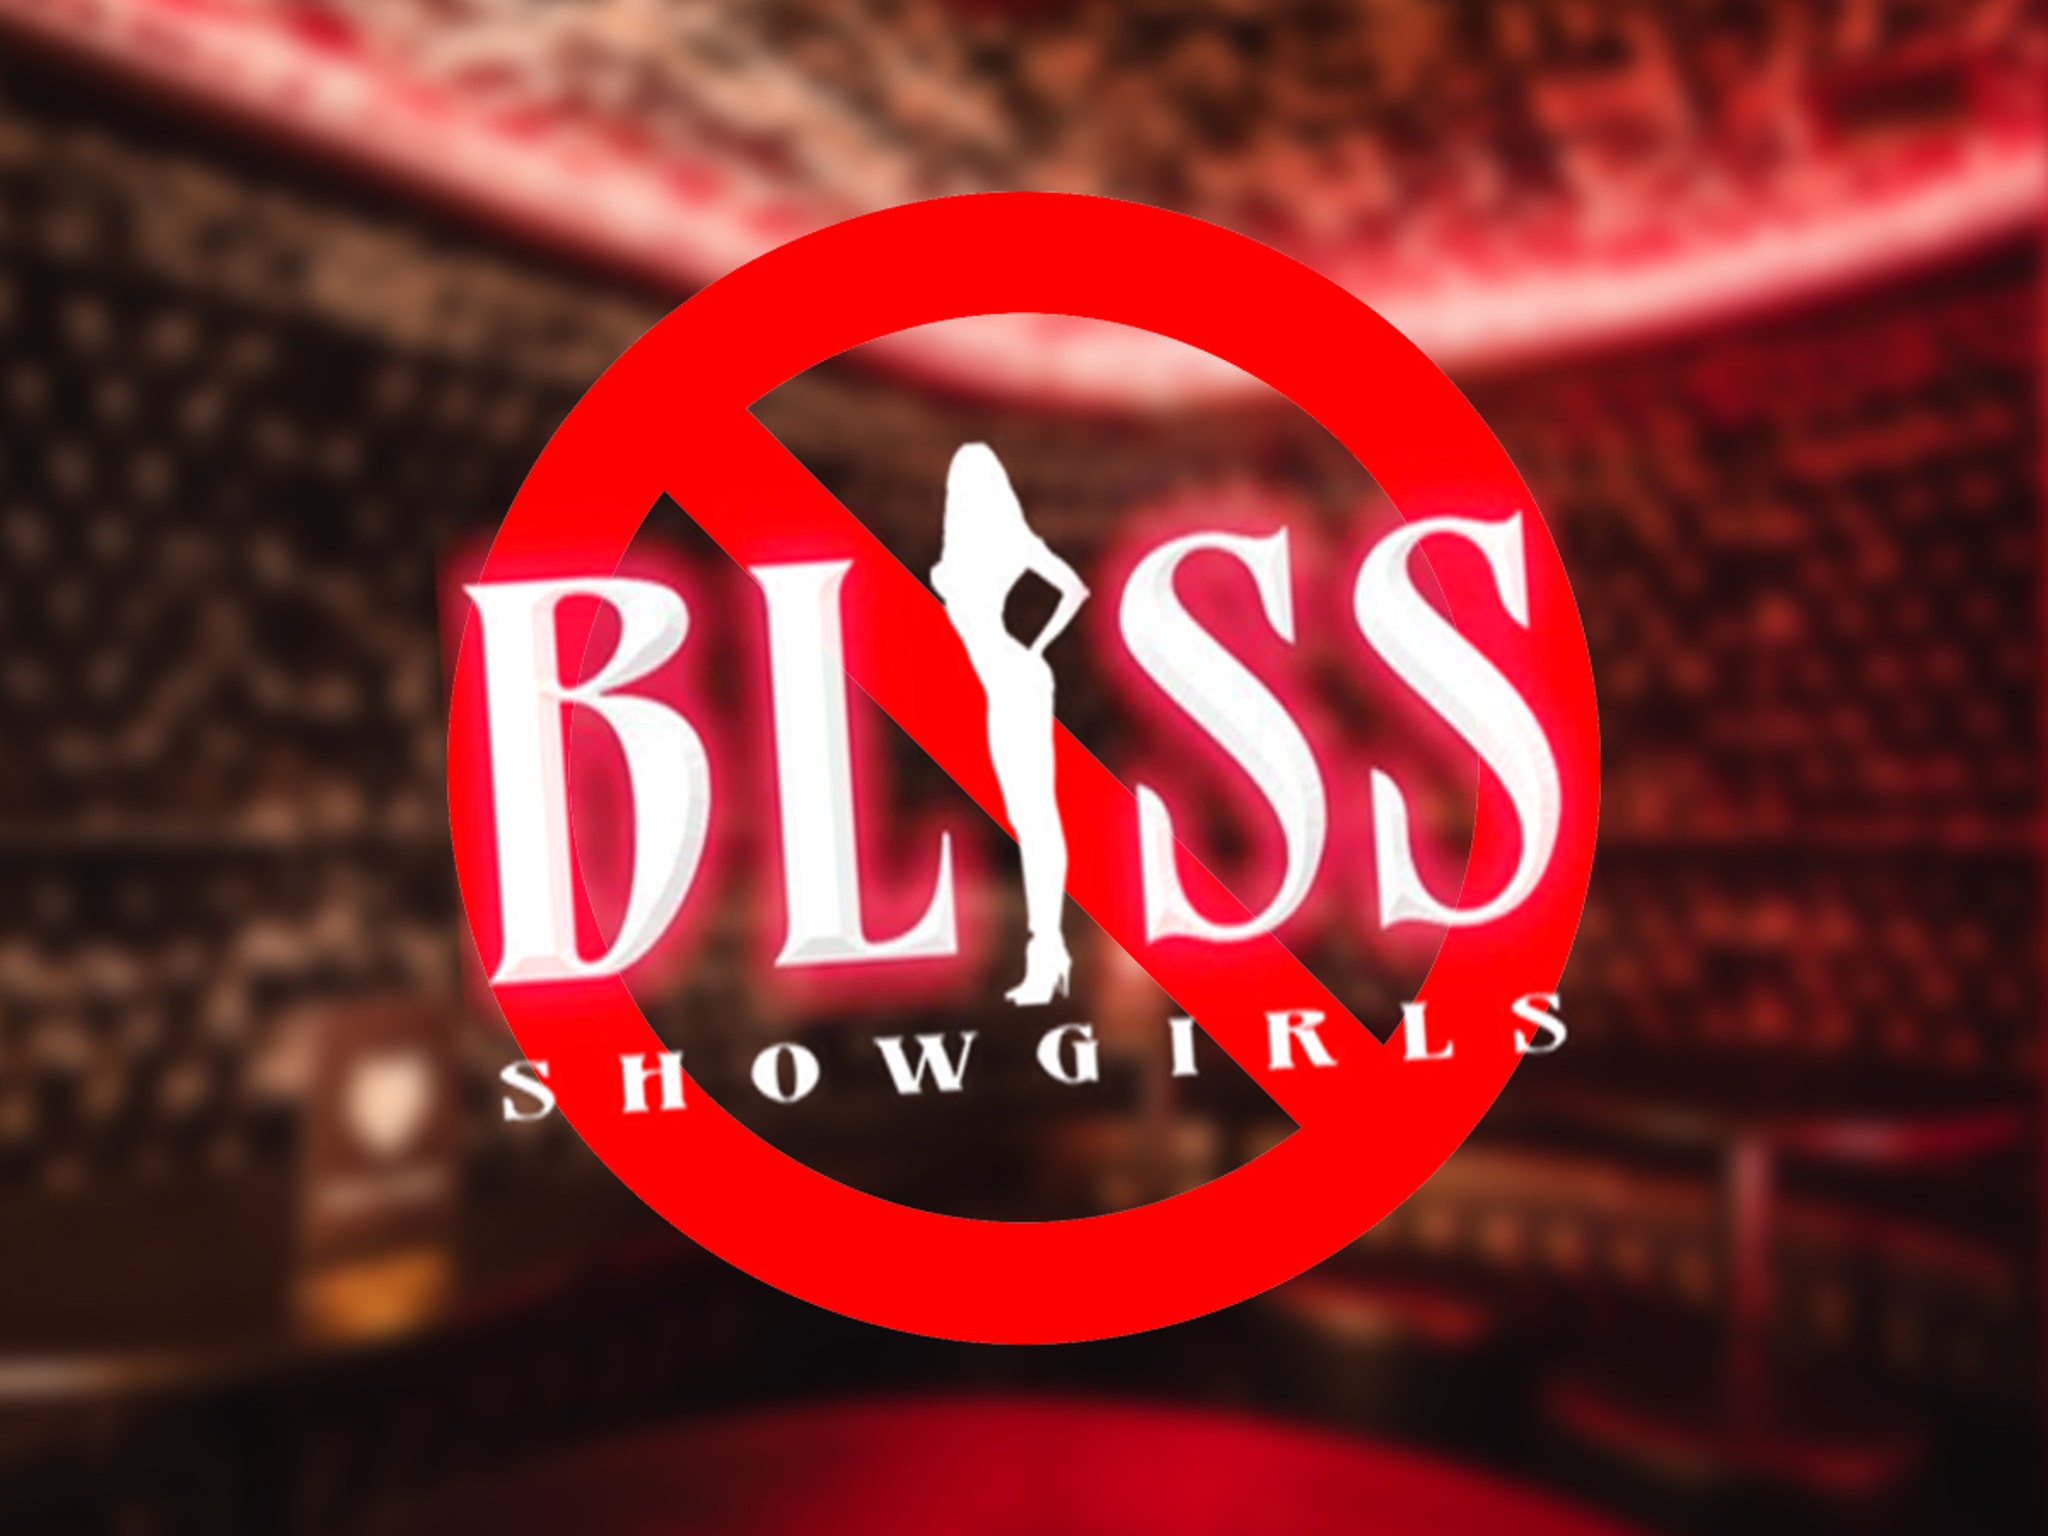 Strip Club Forced to Close After Staying Open, Local News Busted